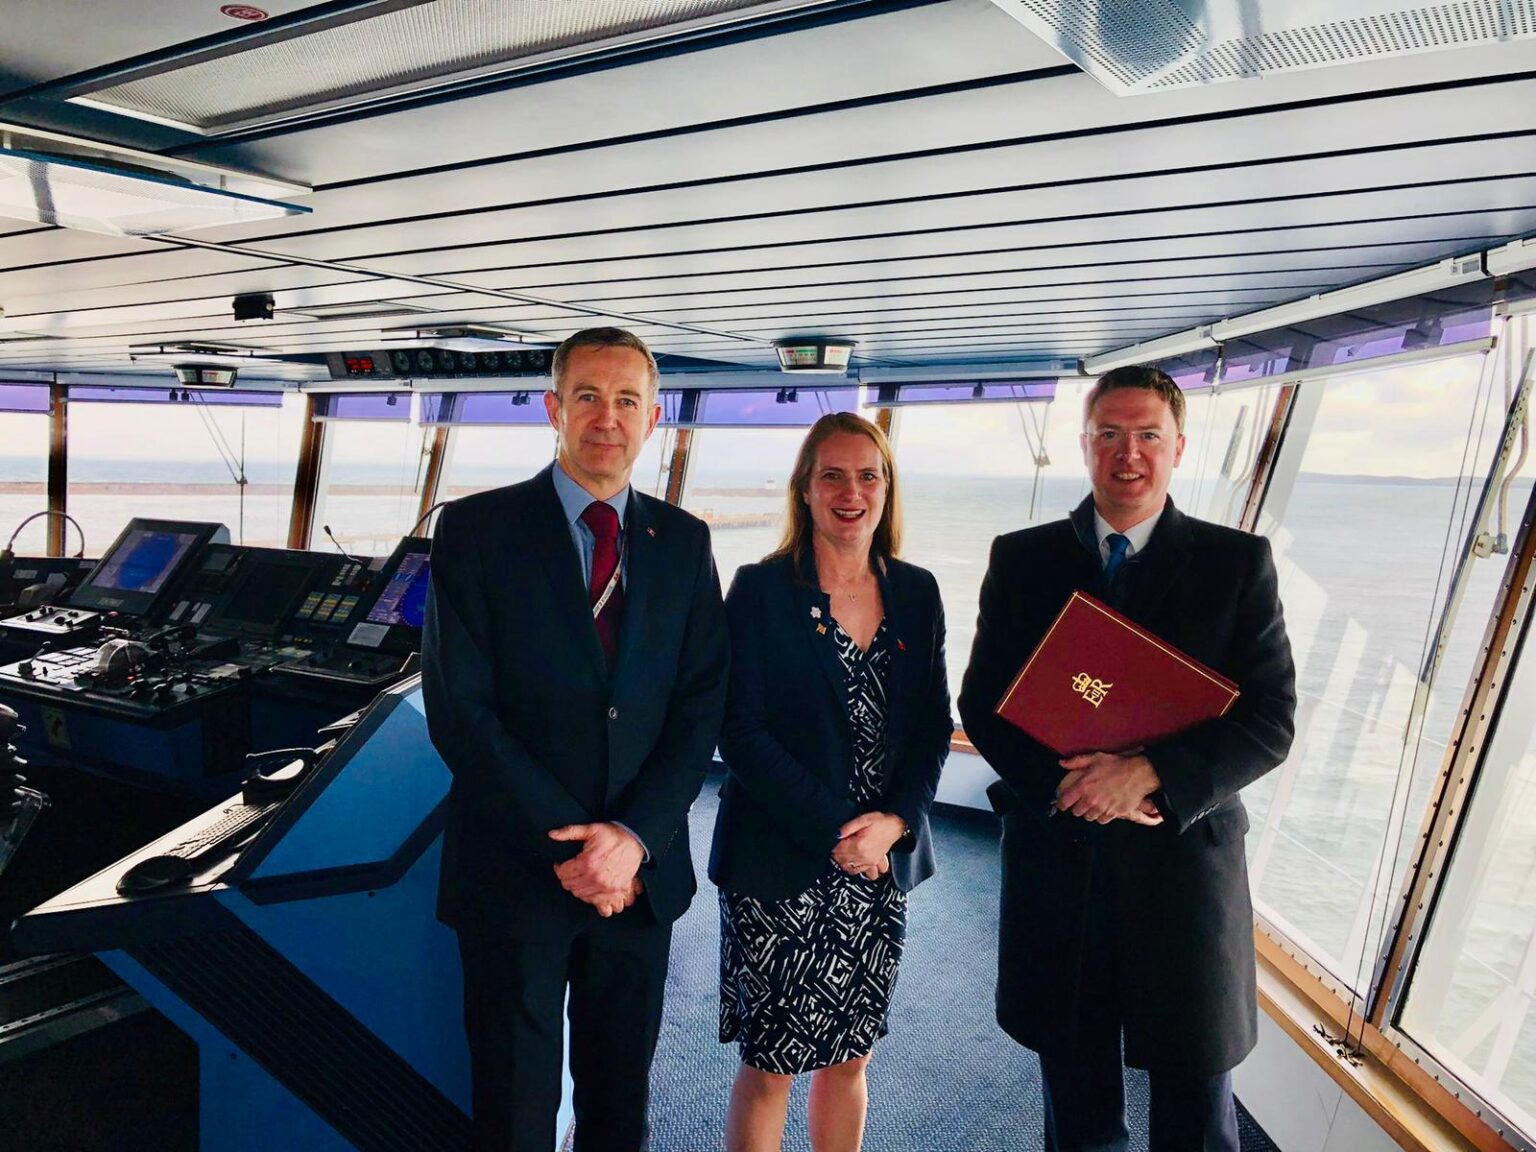 Minister Courts with Virginia Crosbie and Head of UK Ports Ian Davies on board the Stena Adventurer.